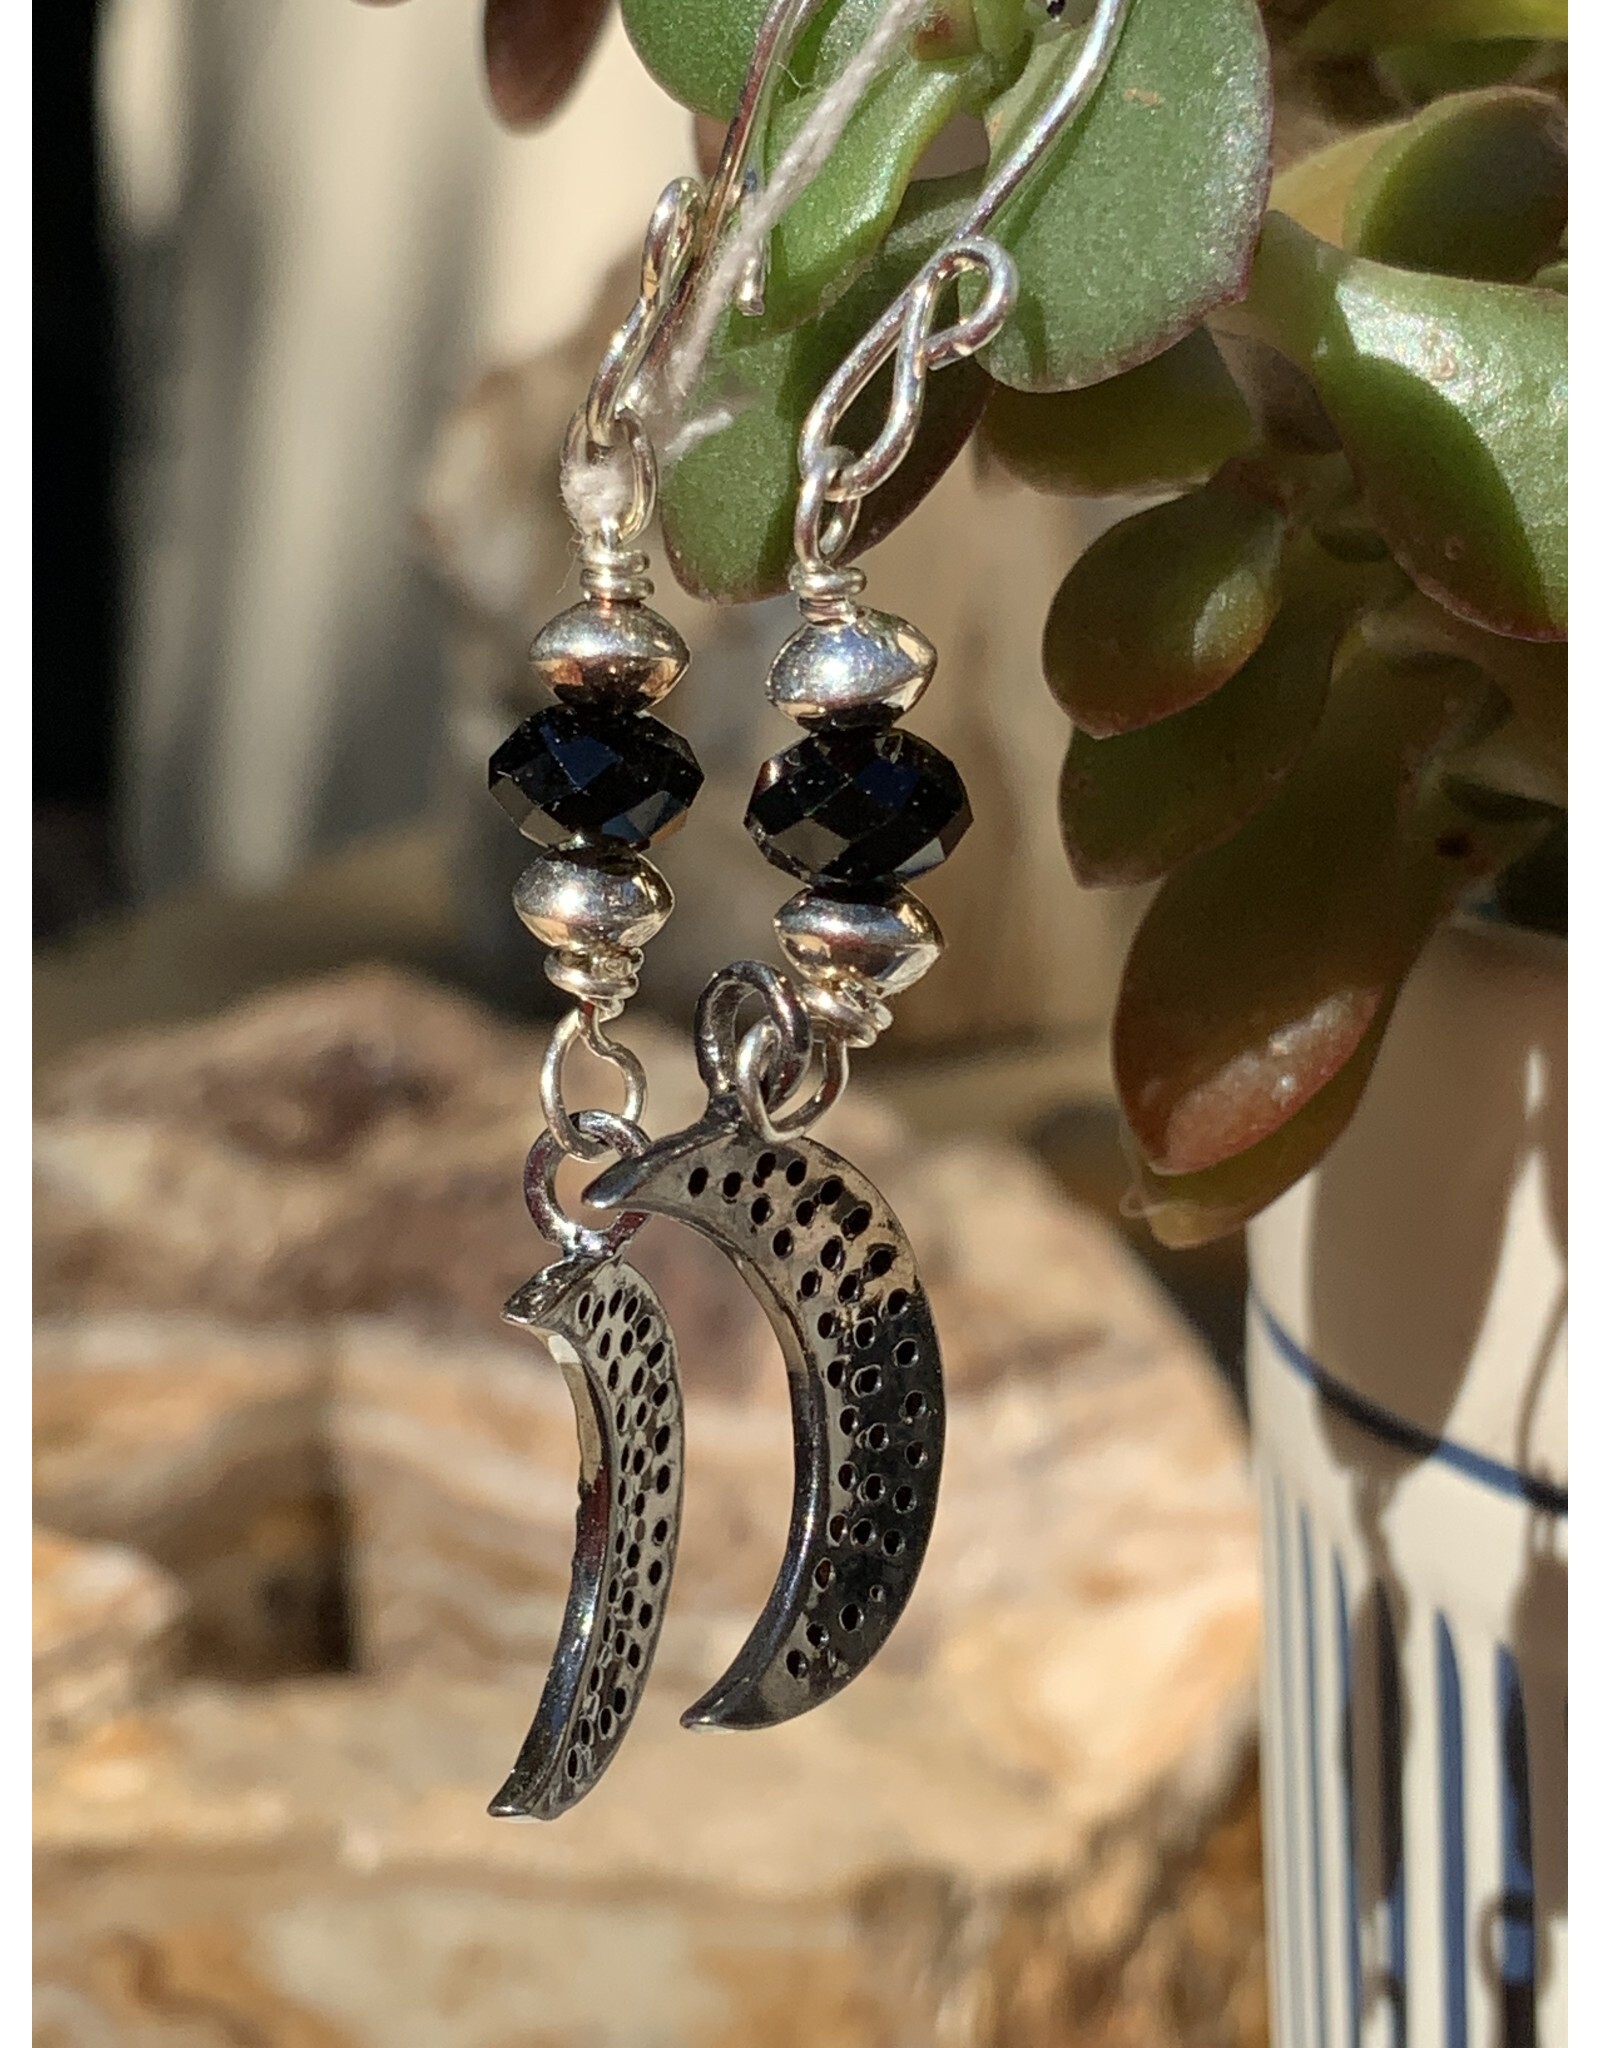 Annette Colby - Jeweler Crescent Moon Spinel Earrings -  AC